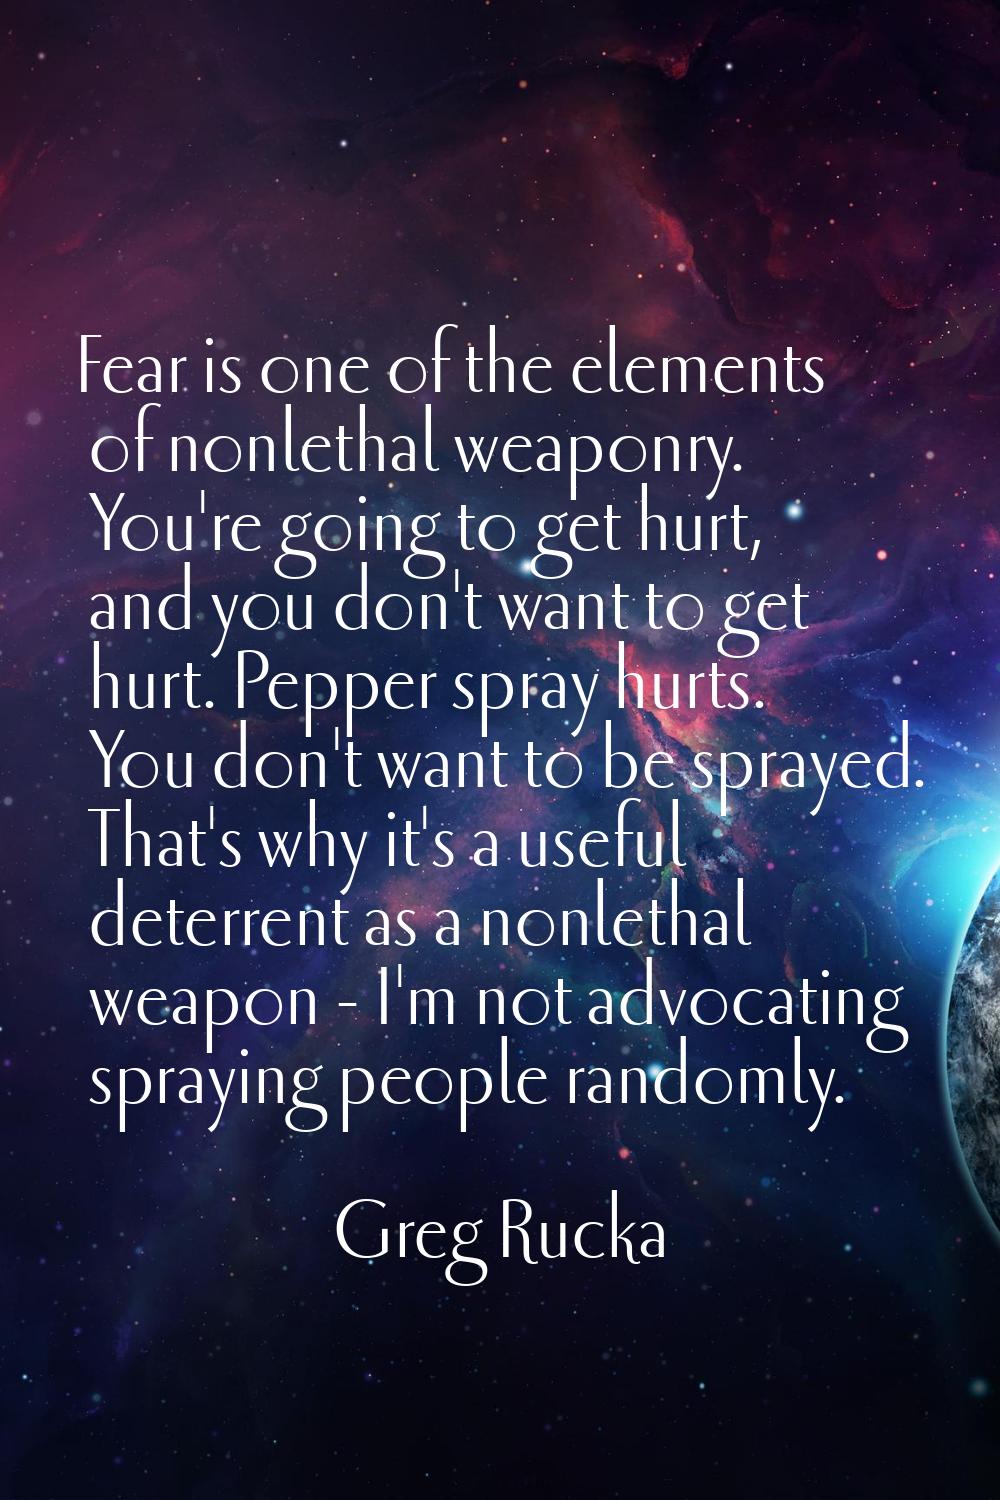 Fear is one of the elements of nonlethal weaponry. You're going to get hurt, and you don't want to 